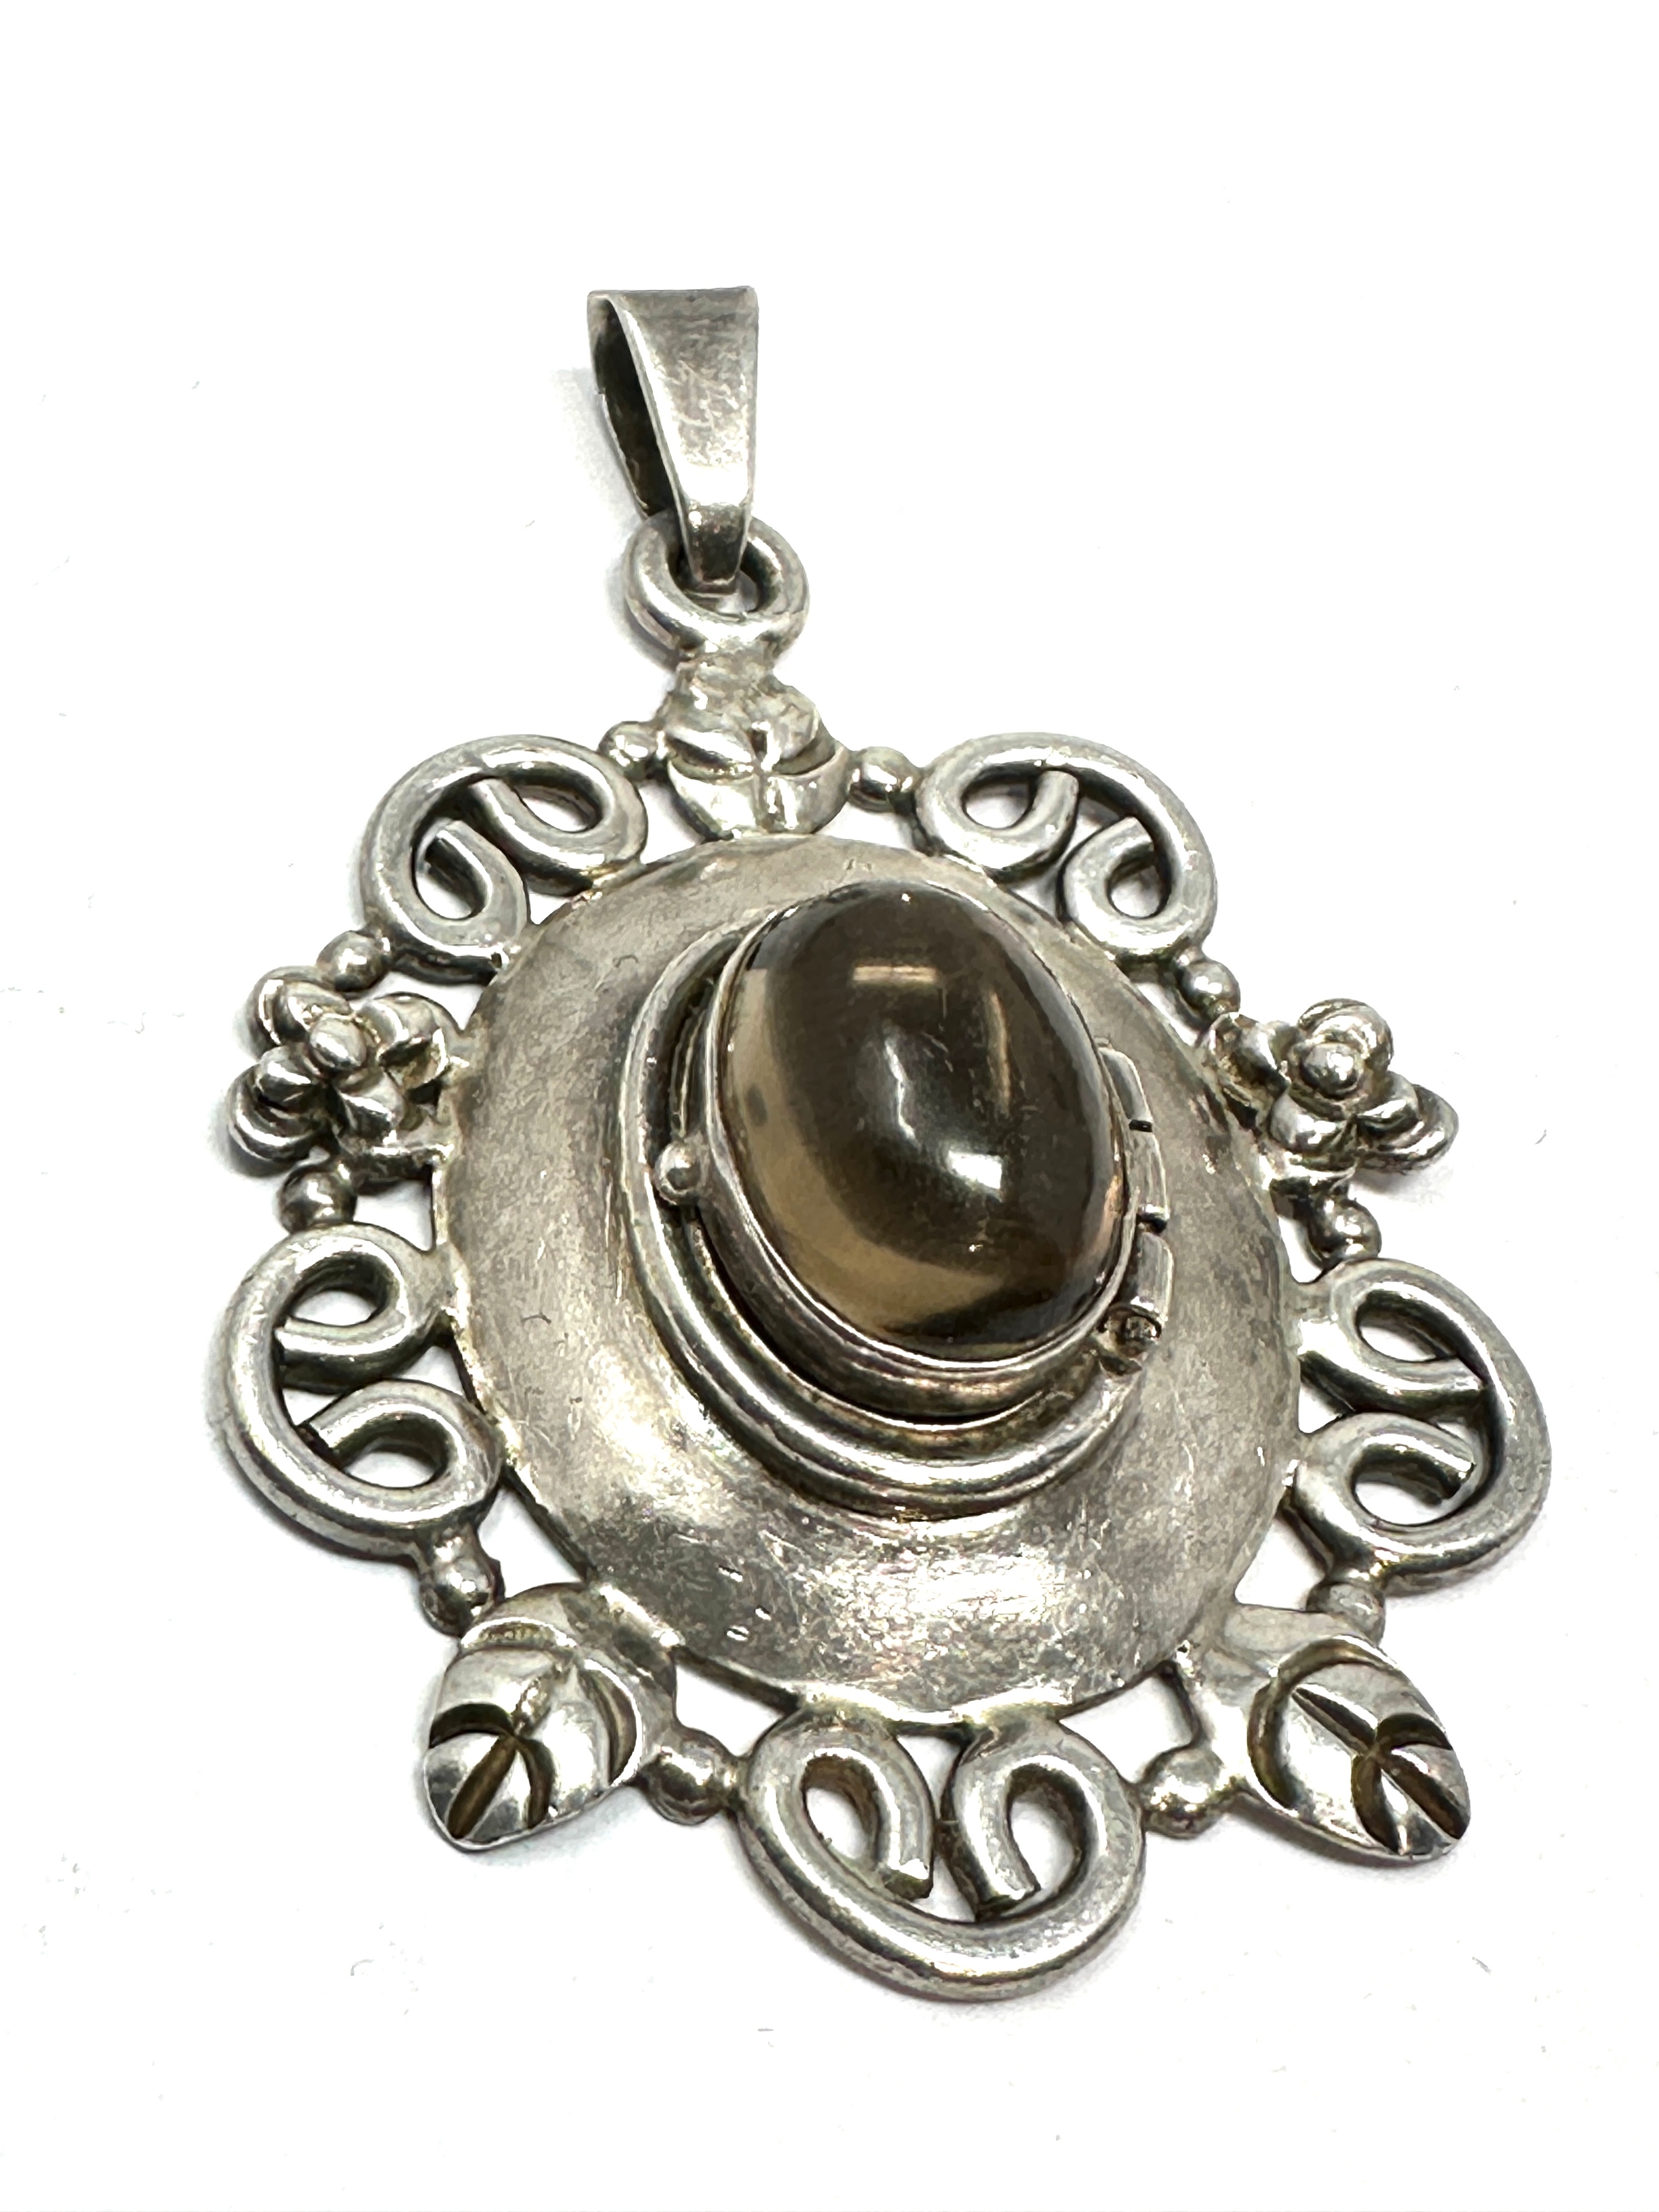 Rare mexico LOS BALLESTEROS Sterling Silver gemstone Poison pendant measures approx 7cm drop by 4.